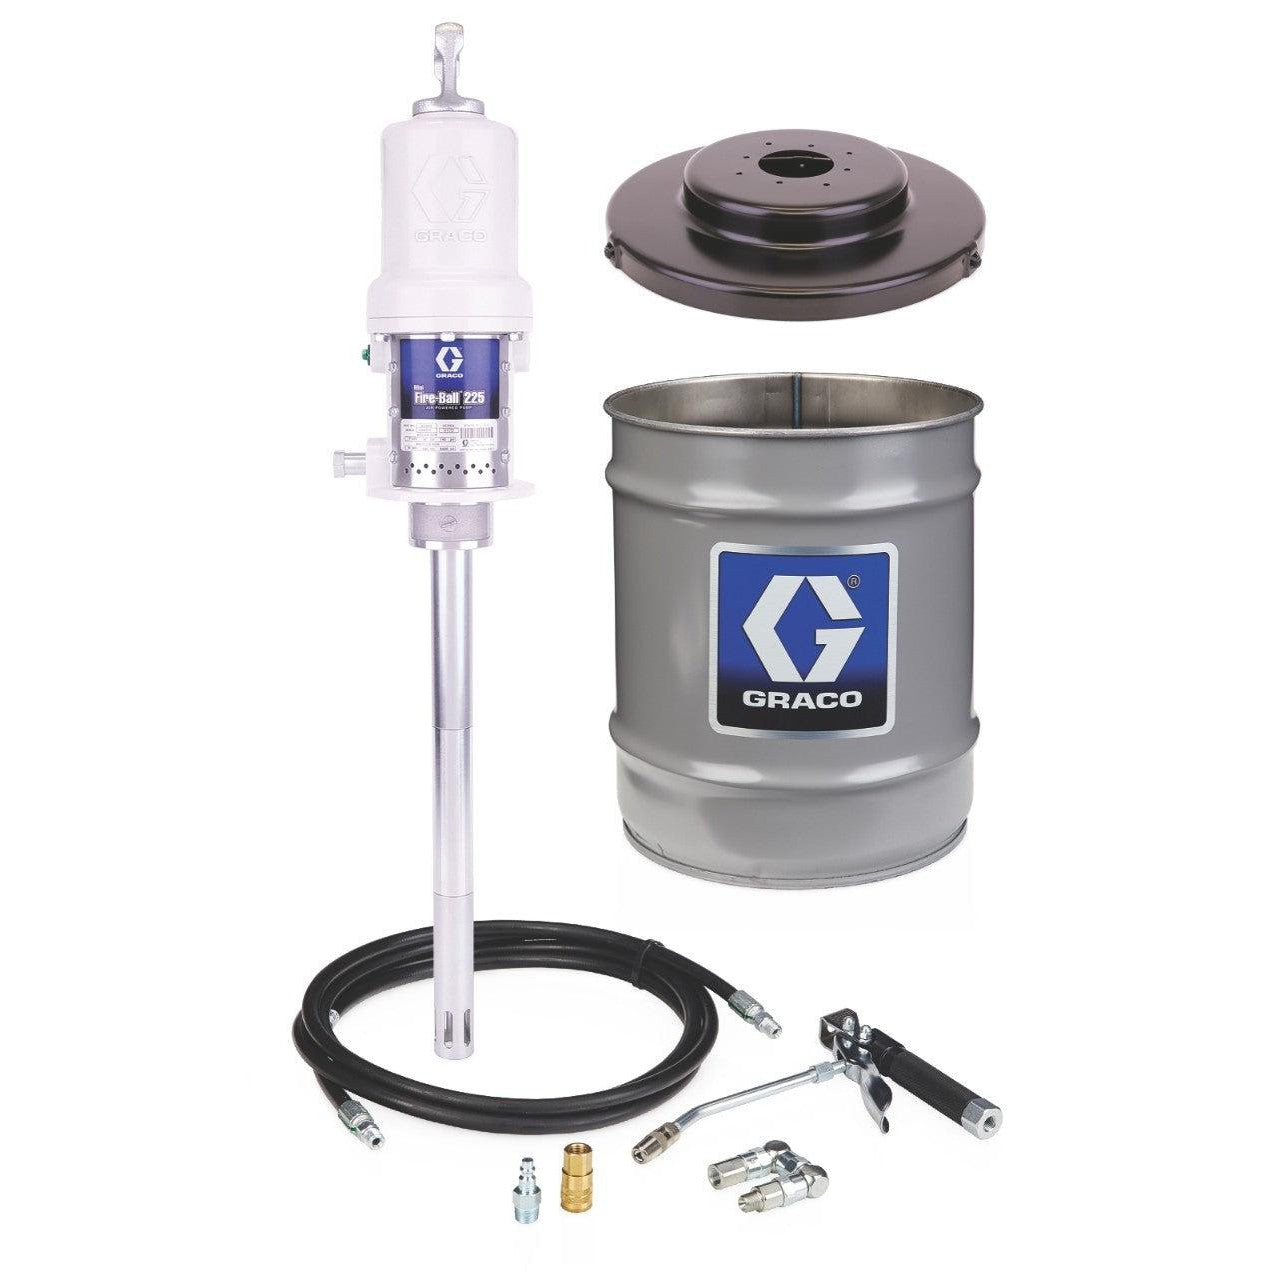 Mini Fire-Ball¨ 225 50:1 35 lb. and 50 lb. (16 kg and 23 kg) Grease Pump - Stationary Pail Dispenser Package